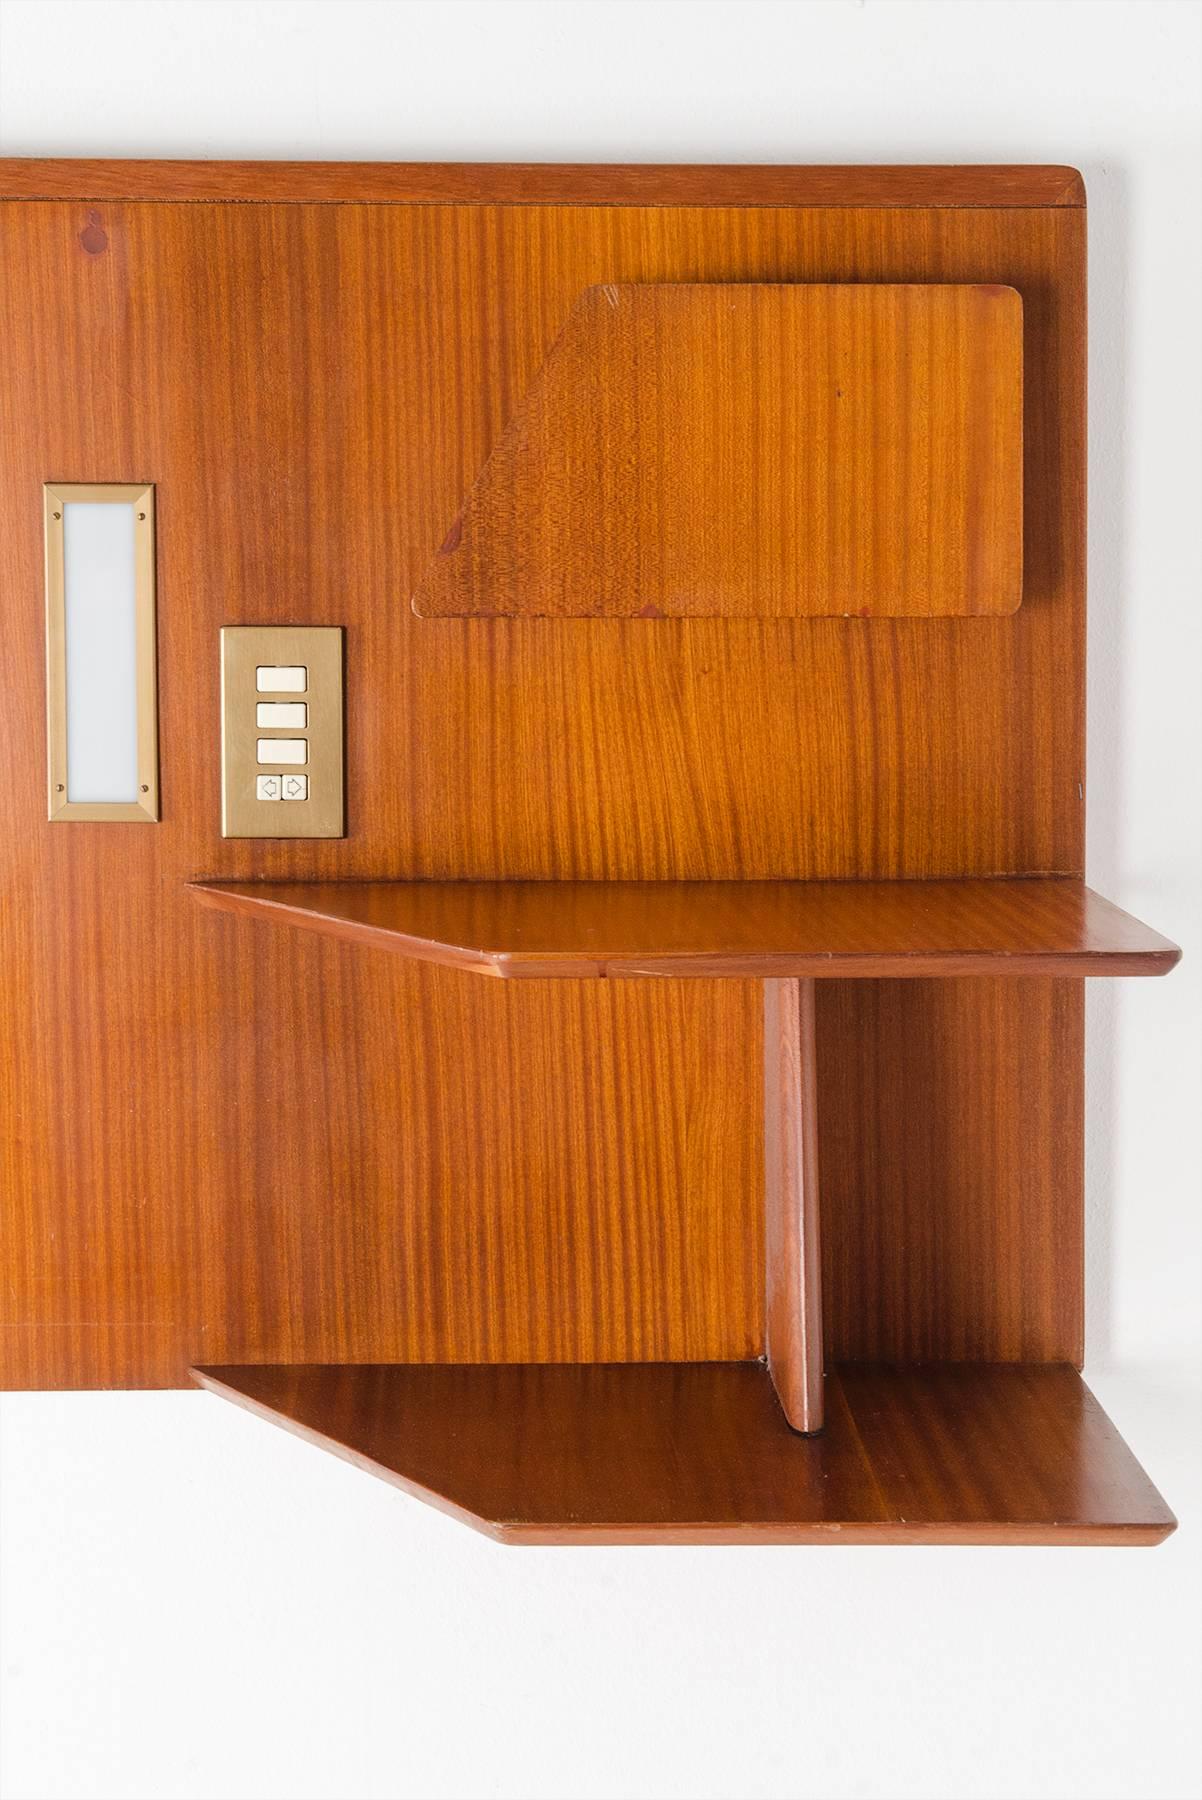 Headboard designed by Gio Ponti and manufactured by Dassi in 1953, exclusively made for the Hotel Royal Continental in Naples, of which Gio Ponti was in charge of the interior design. The structure is made of mahogany and it has the original